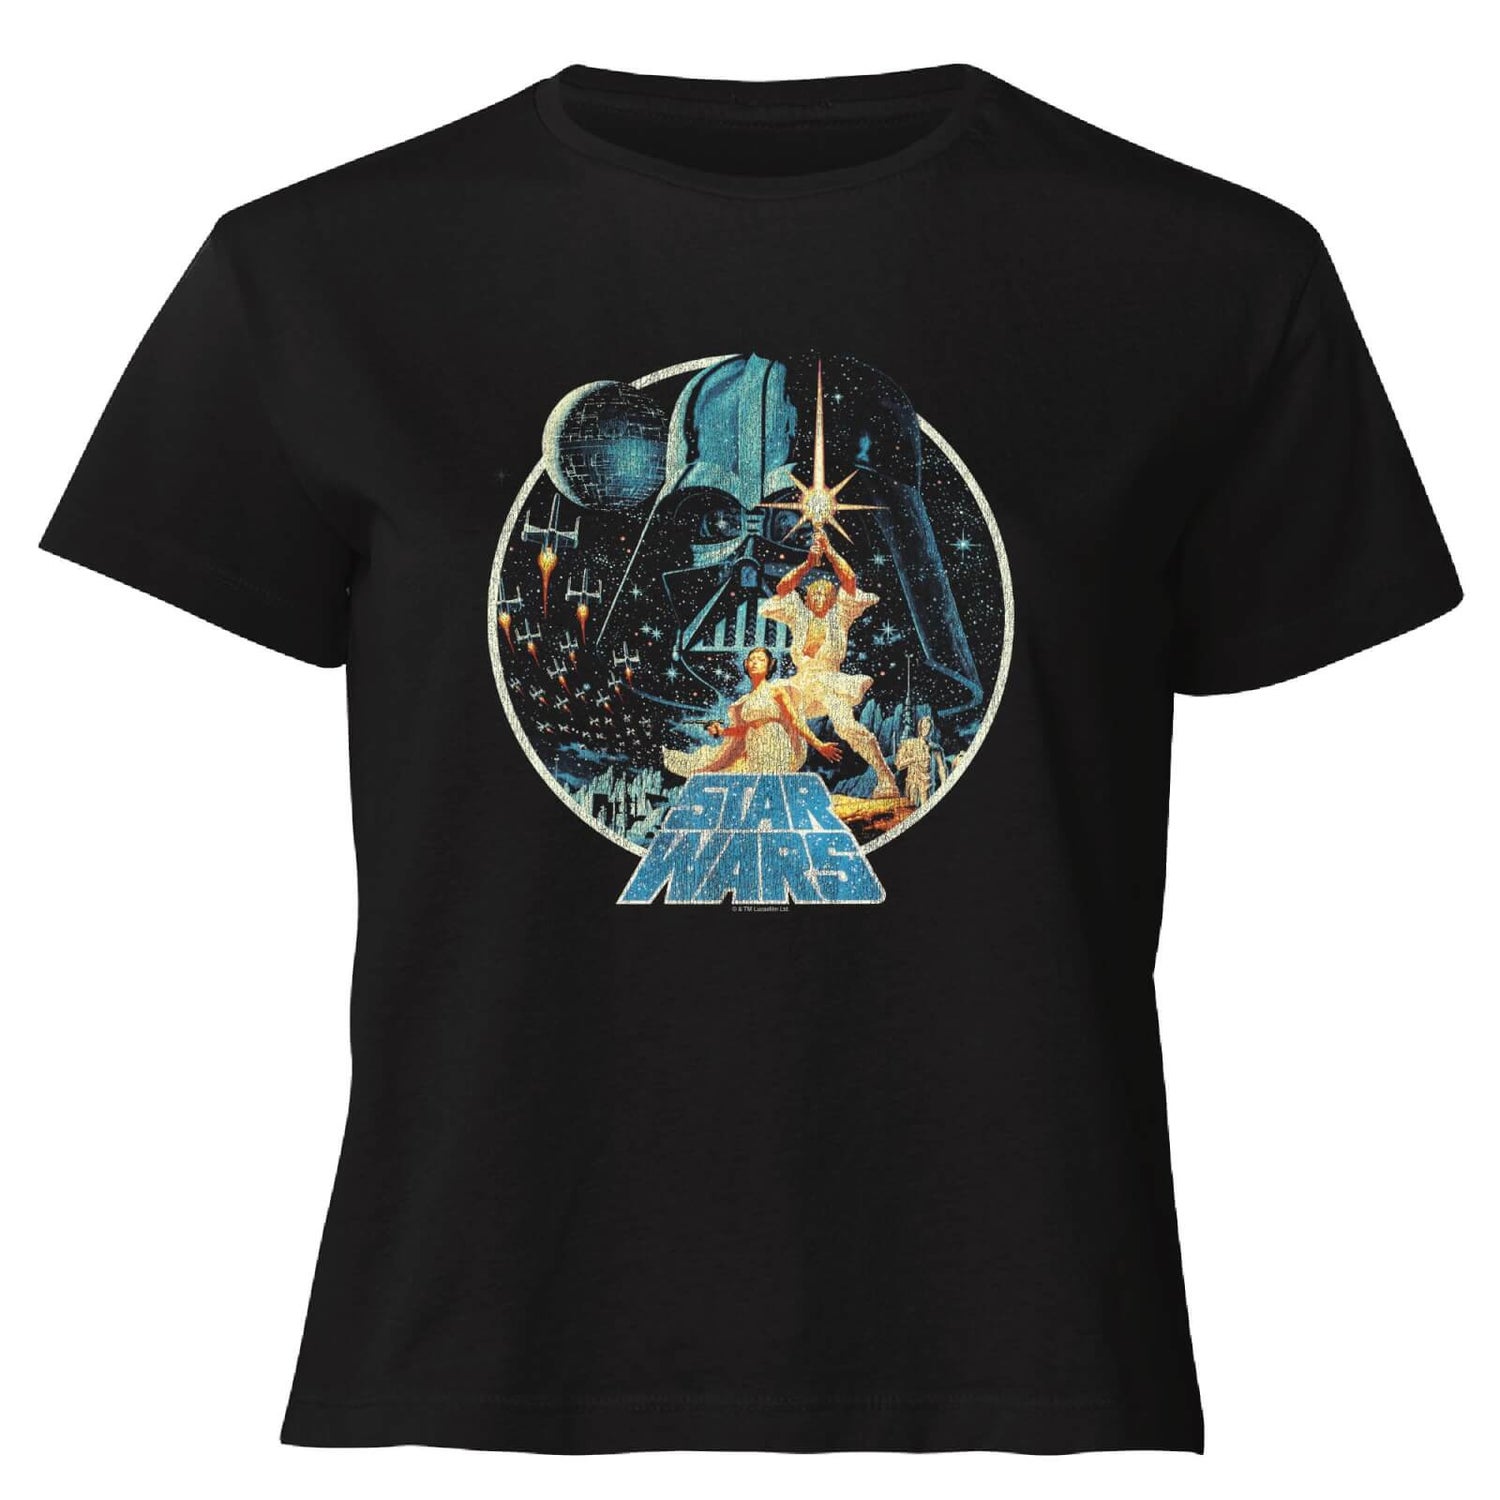 Star Wars Classic Vintage Victory Women's Cropped T-Shirt - Black